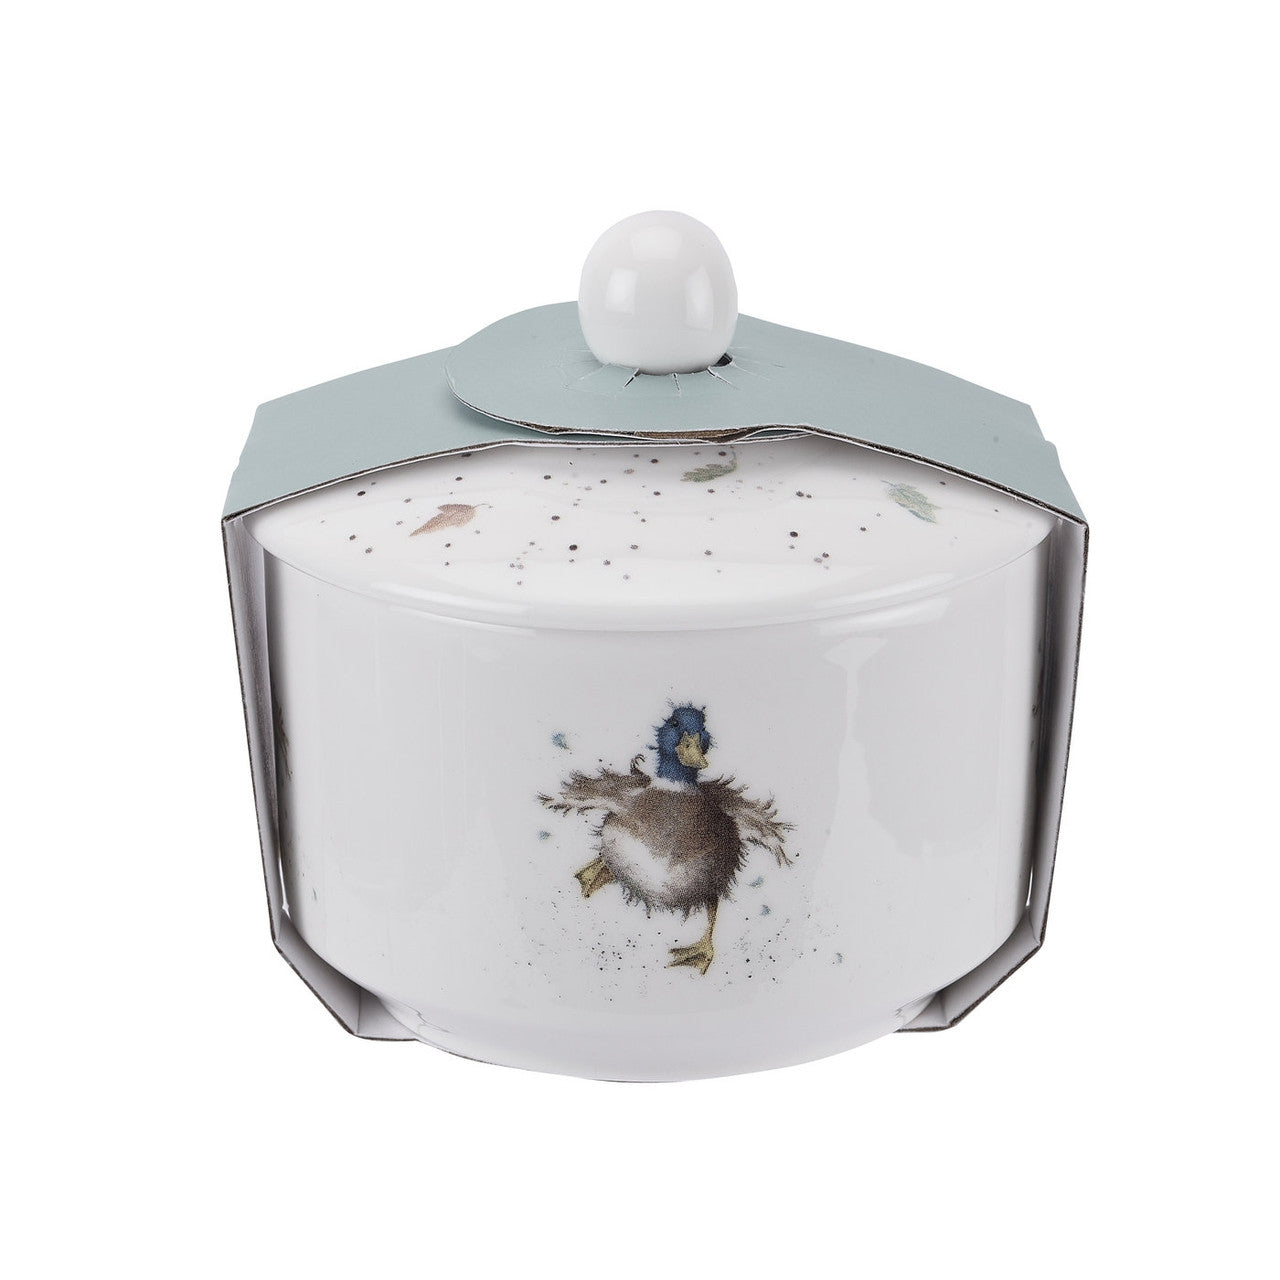 'Waddle Duck' Fine Bone China Covered Sugar pot from Wrendale Designs and Portmeirion